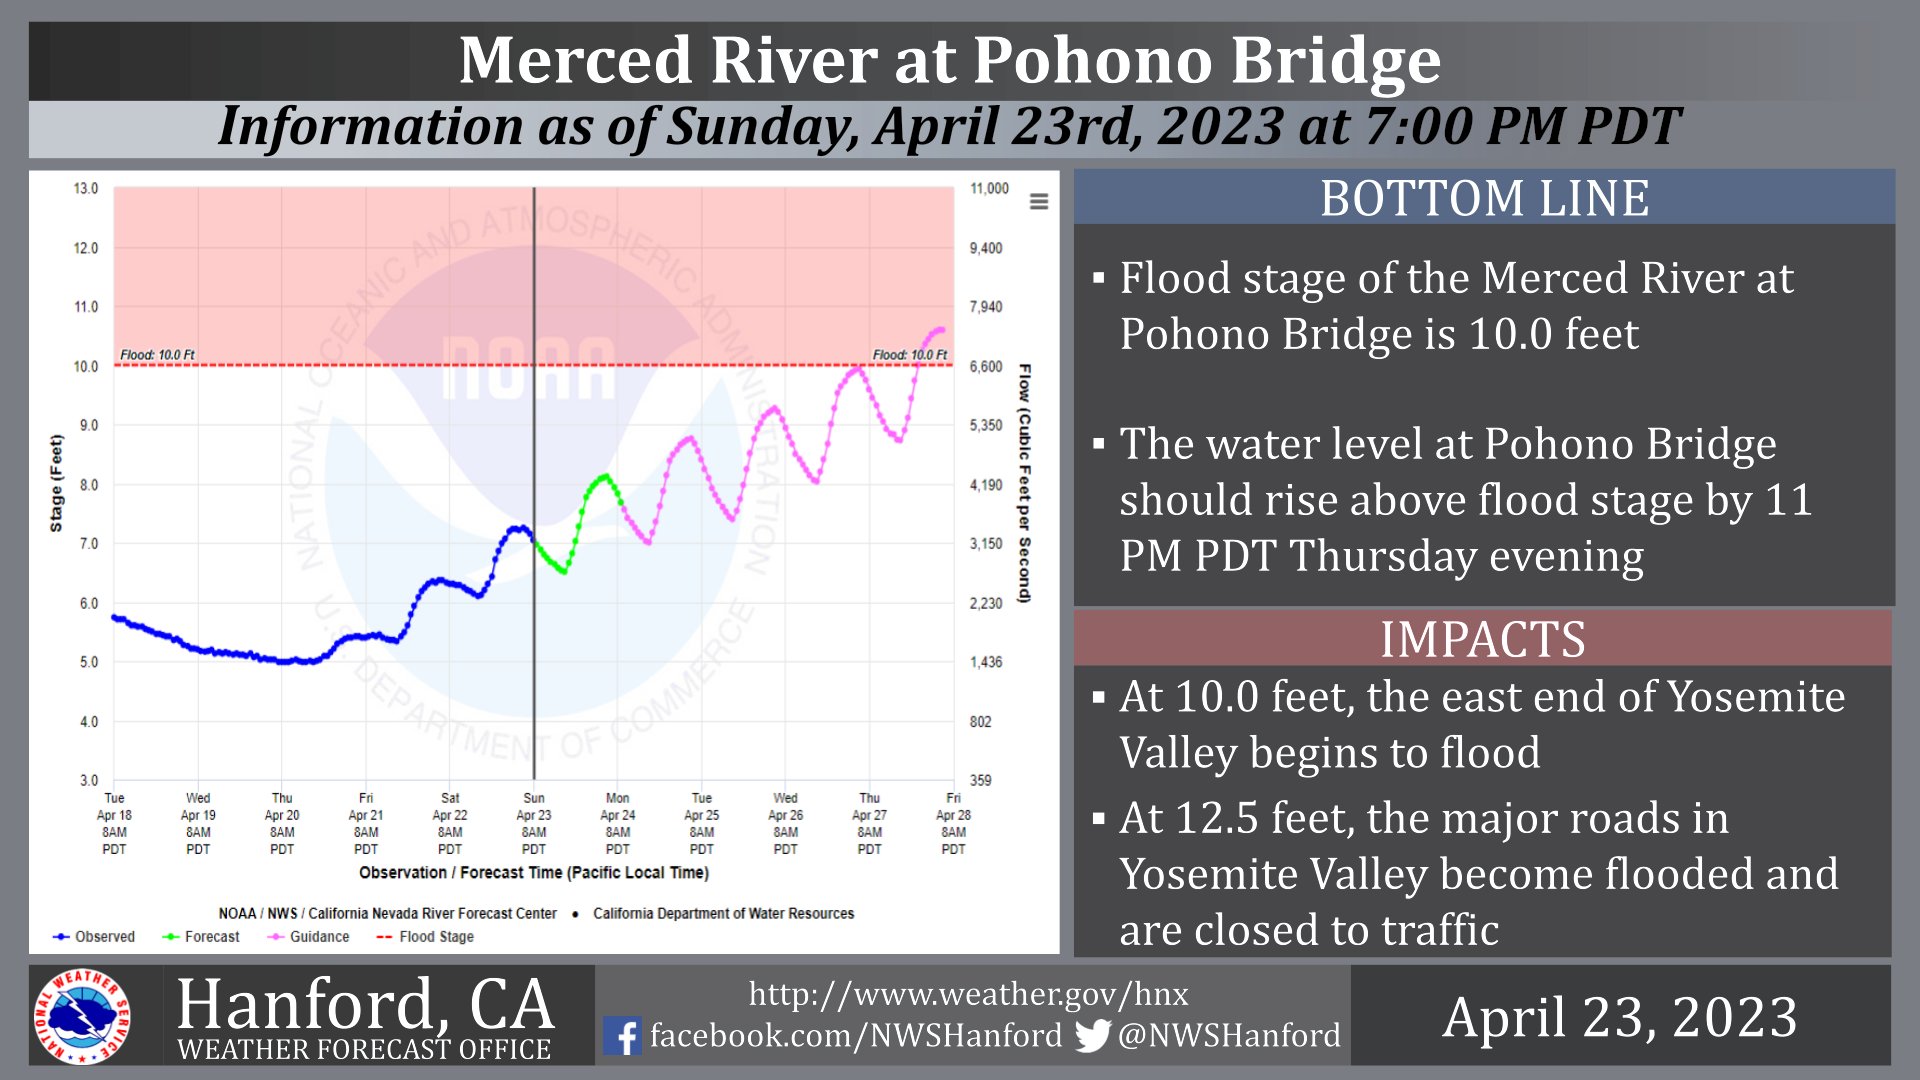 Water level of the Merced River at Pohono Bridge, 19 April 2023 - 23 April 2023. Graphic: Hanford Weather forecast Office